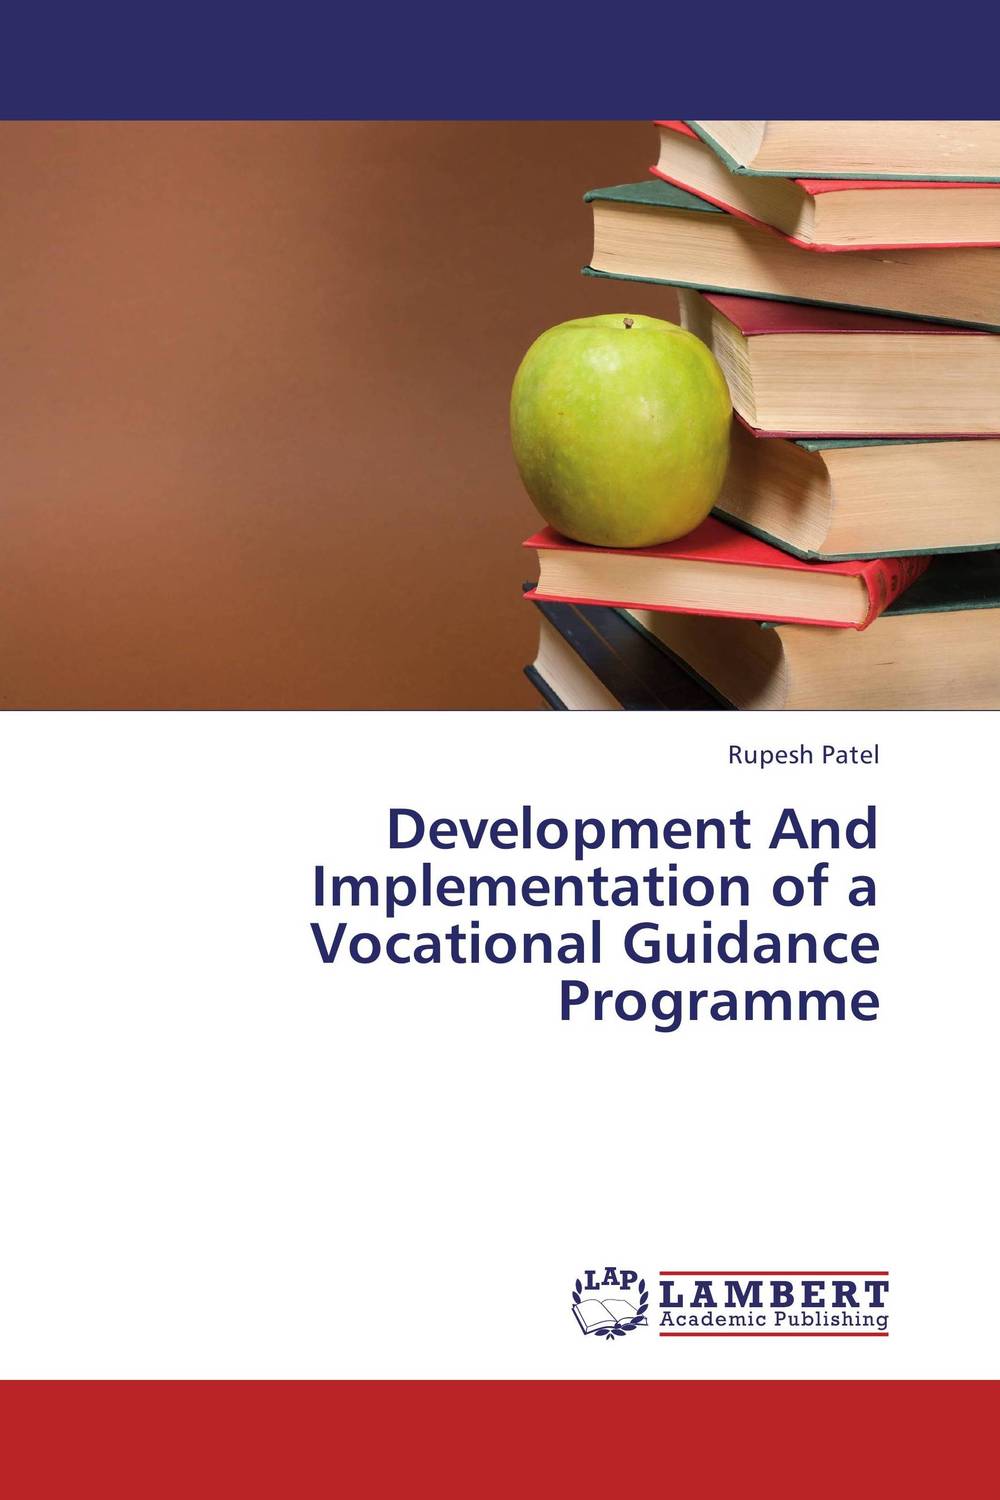 Development And Implementation of a Vocational Guidance Programme